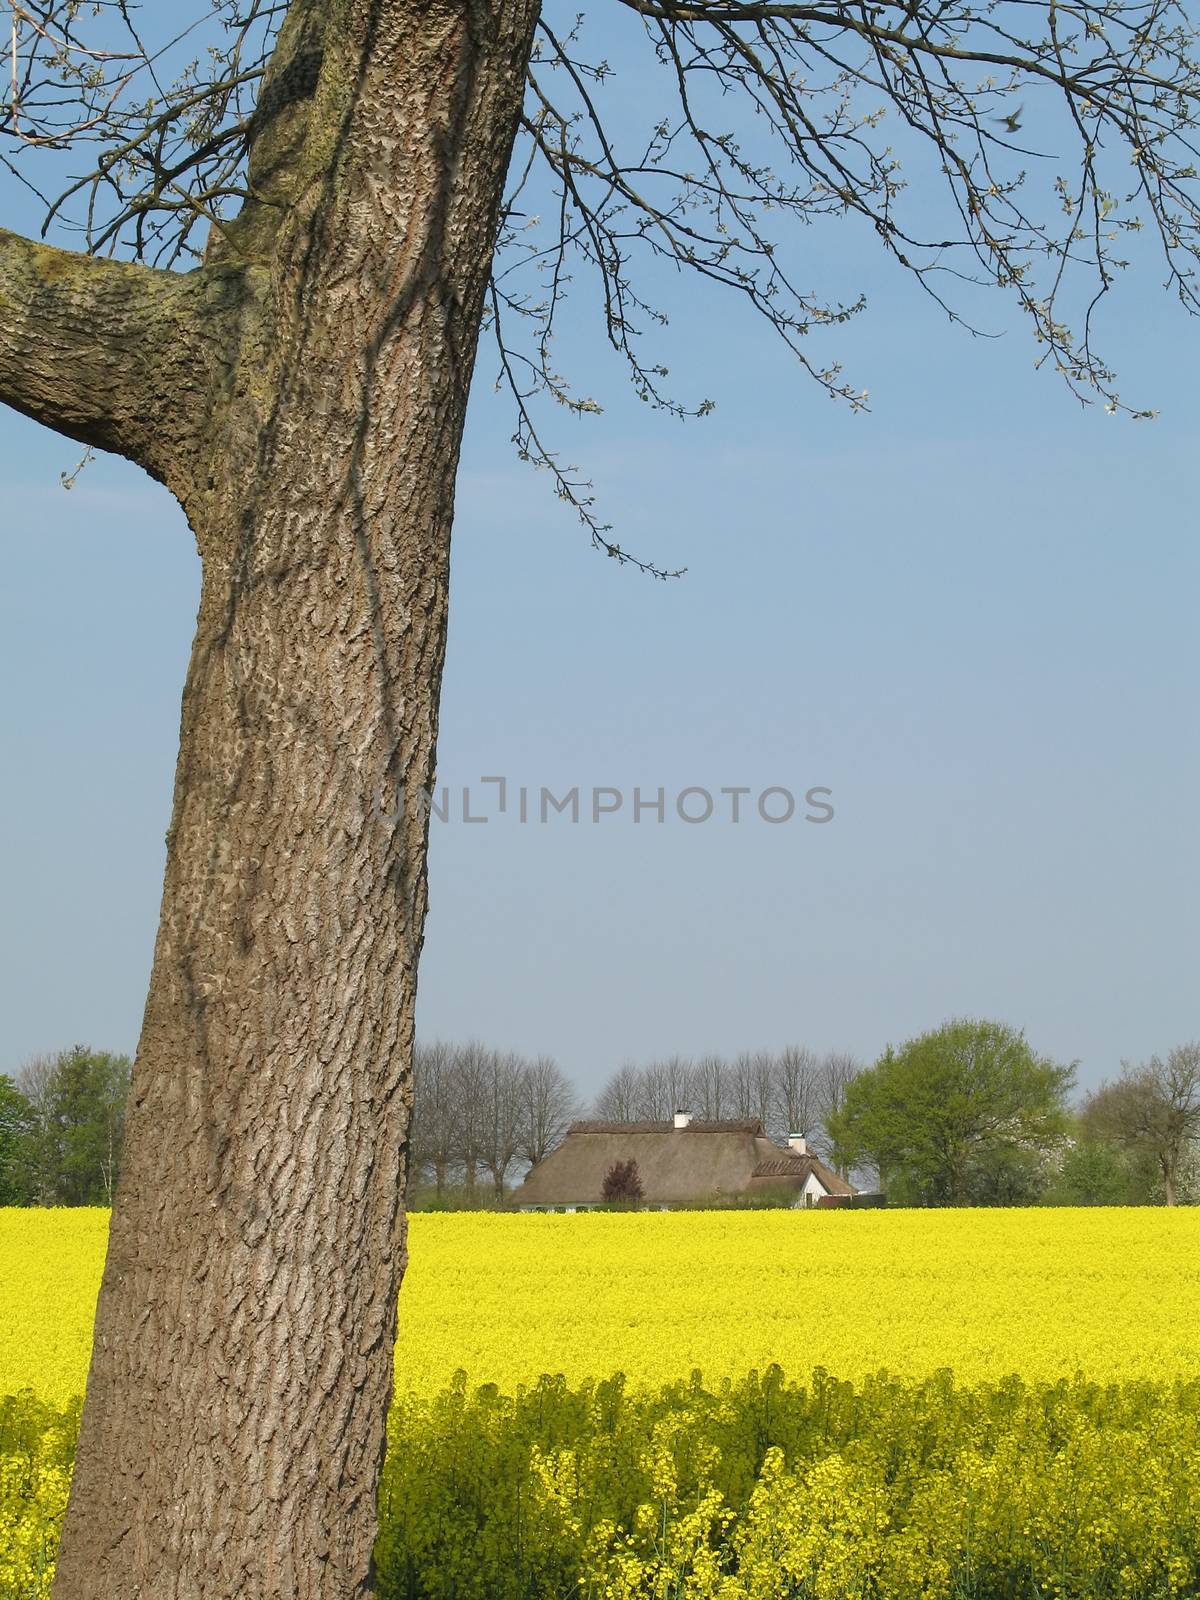 Canola field at a sunny day in Schleswig-Holstein, Germany.